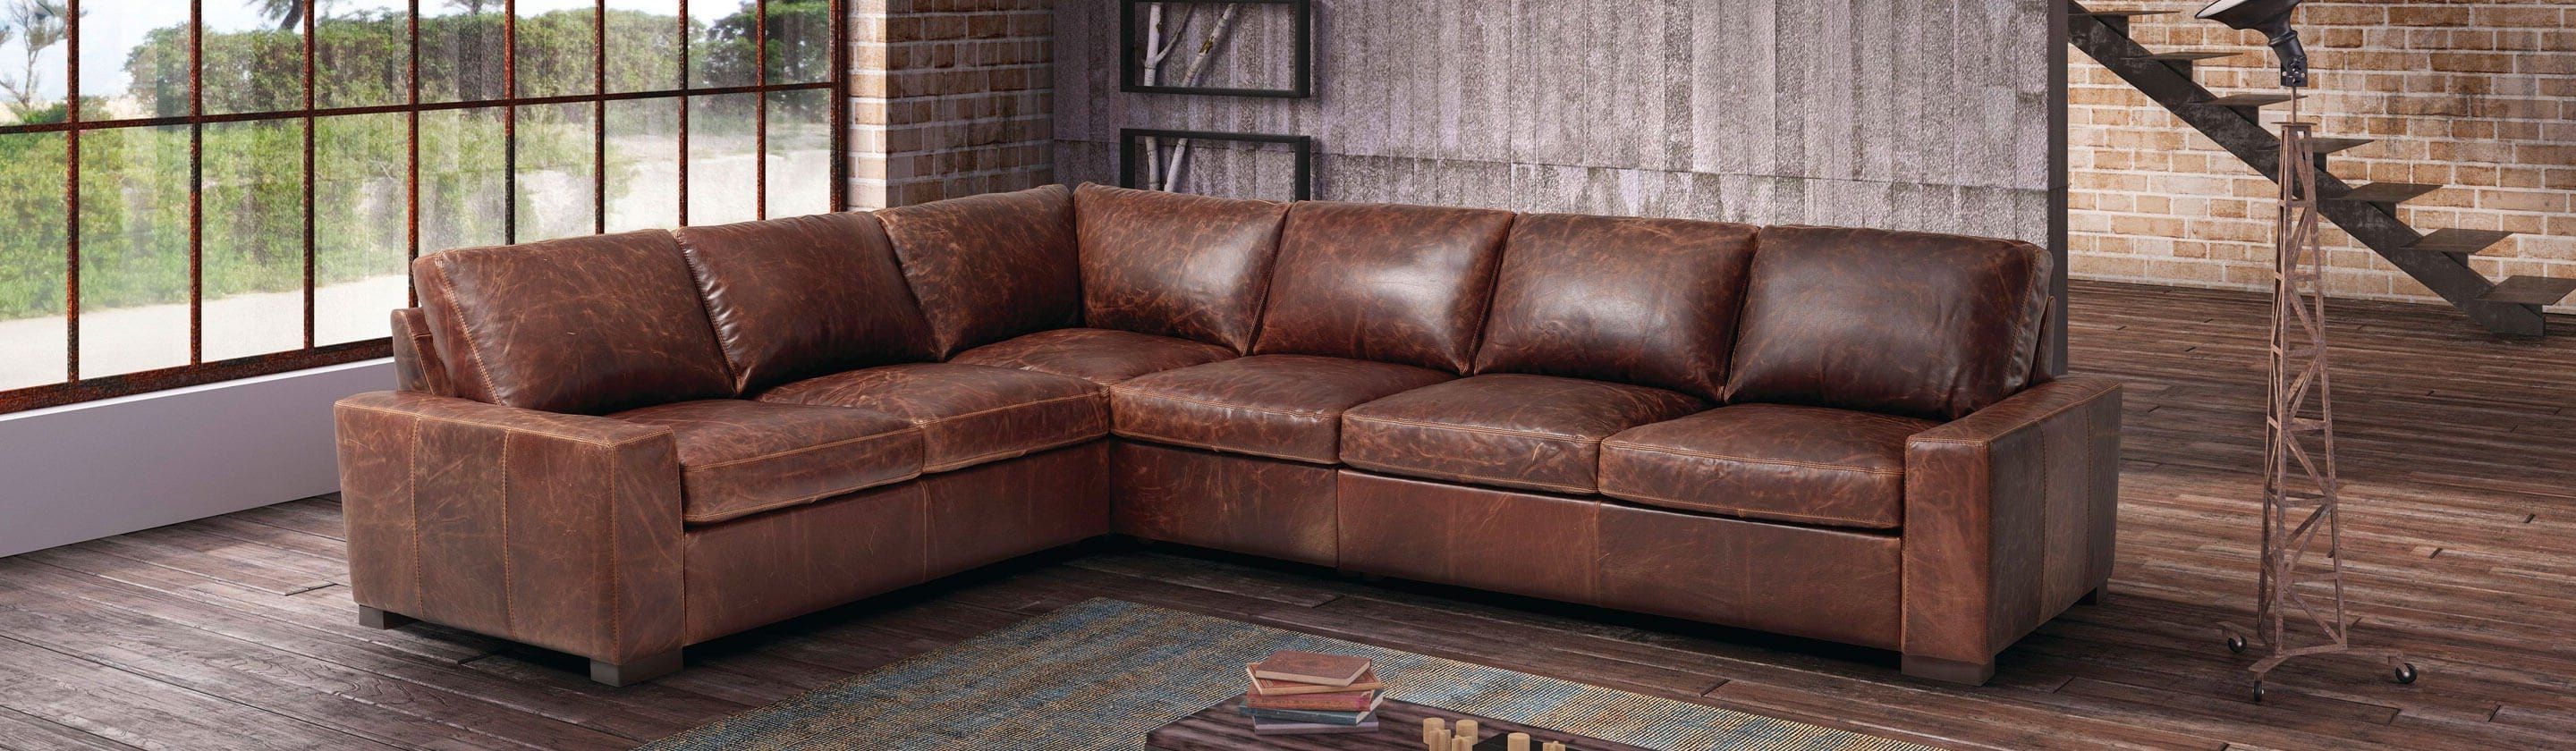 Sectional Sofas & Couches | Living Room Sectionals Intended For Sectional Couches For Living Room (Gallery 17 of 20)